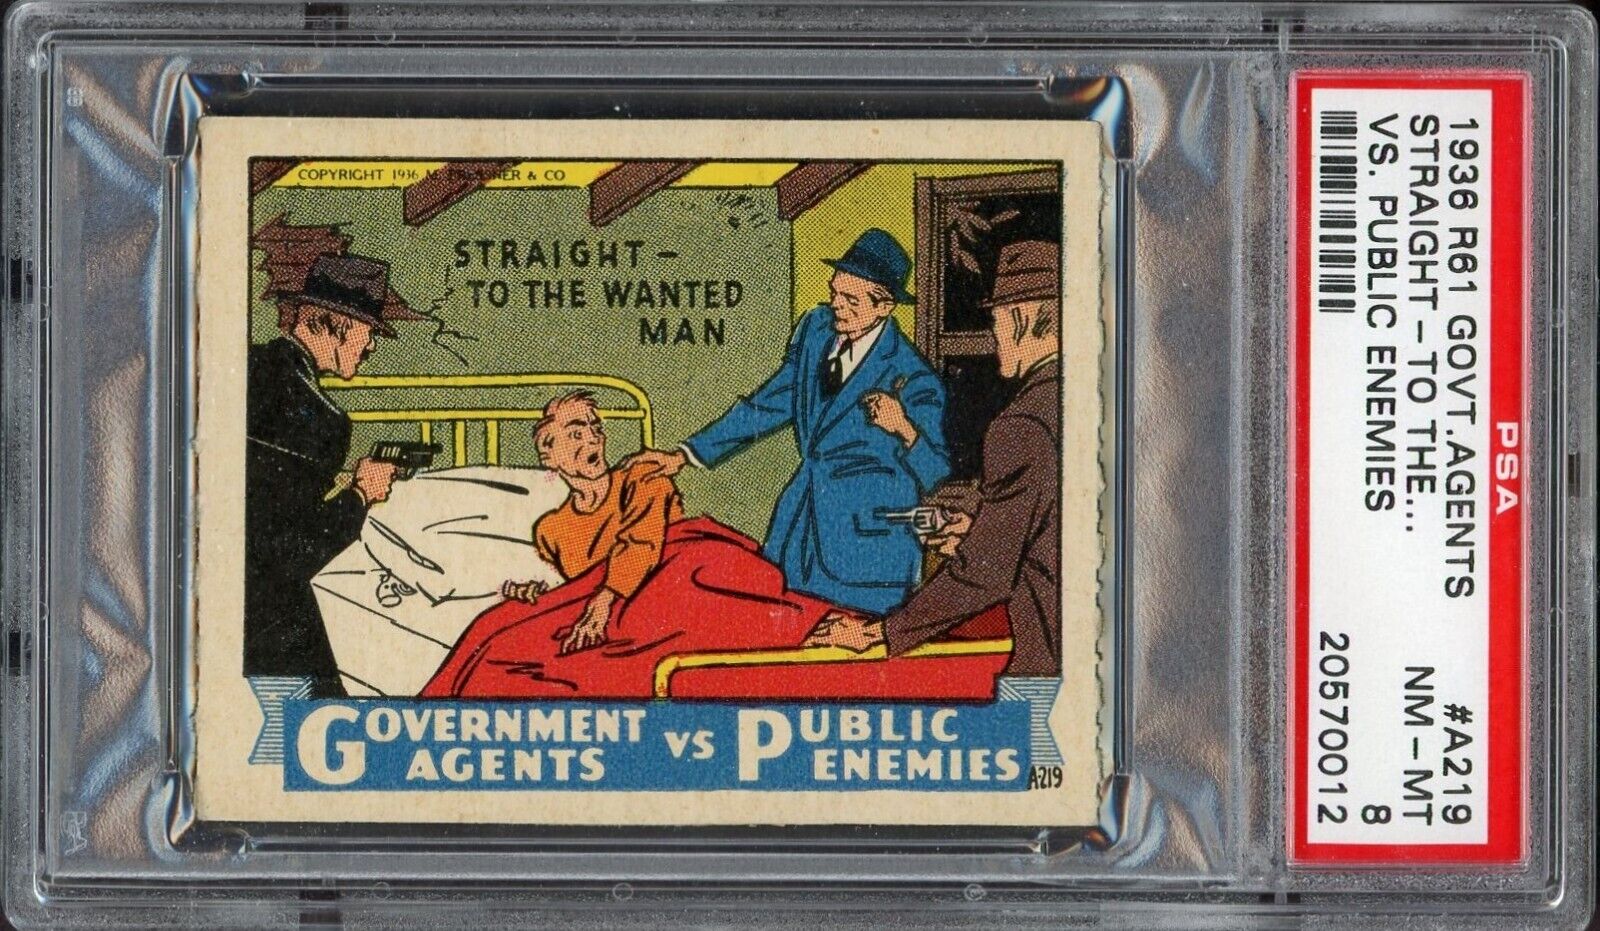 1936 R61 Government Agents Public Enemies A219 Straight Wanted Man (PSA 8 NM/MT)